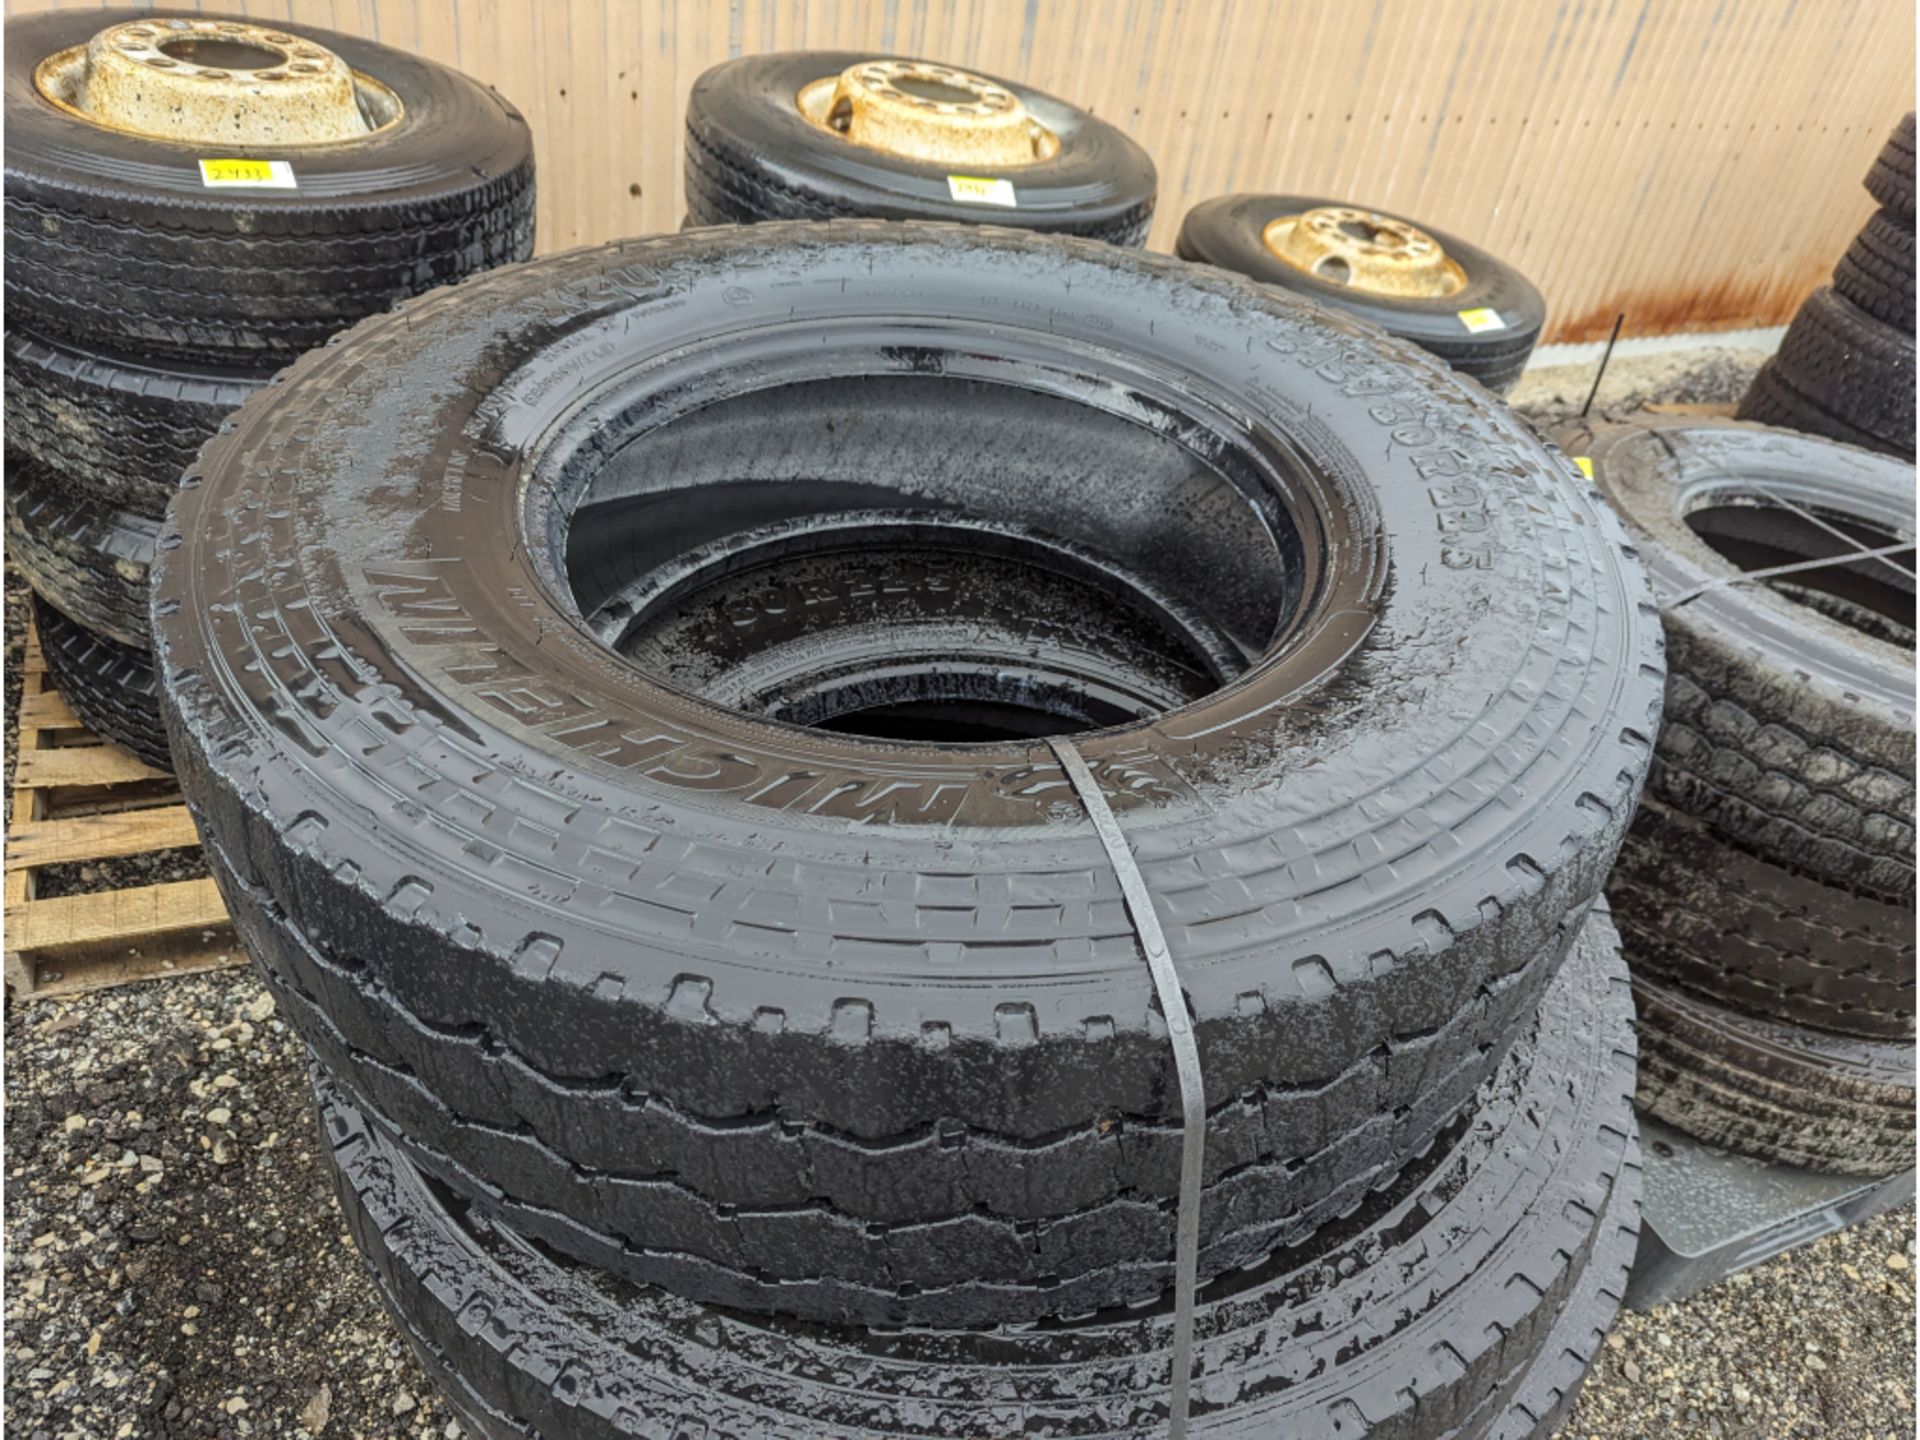 4 Michelin XZUS 2 315/80R22.5 commercial truck tires USED Virgin Tread Surplus Take Off - Image 2 of 5